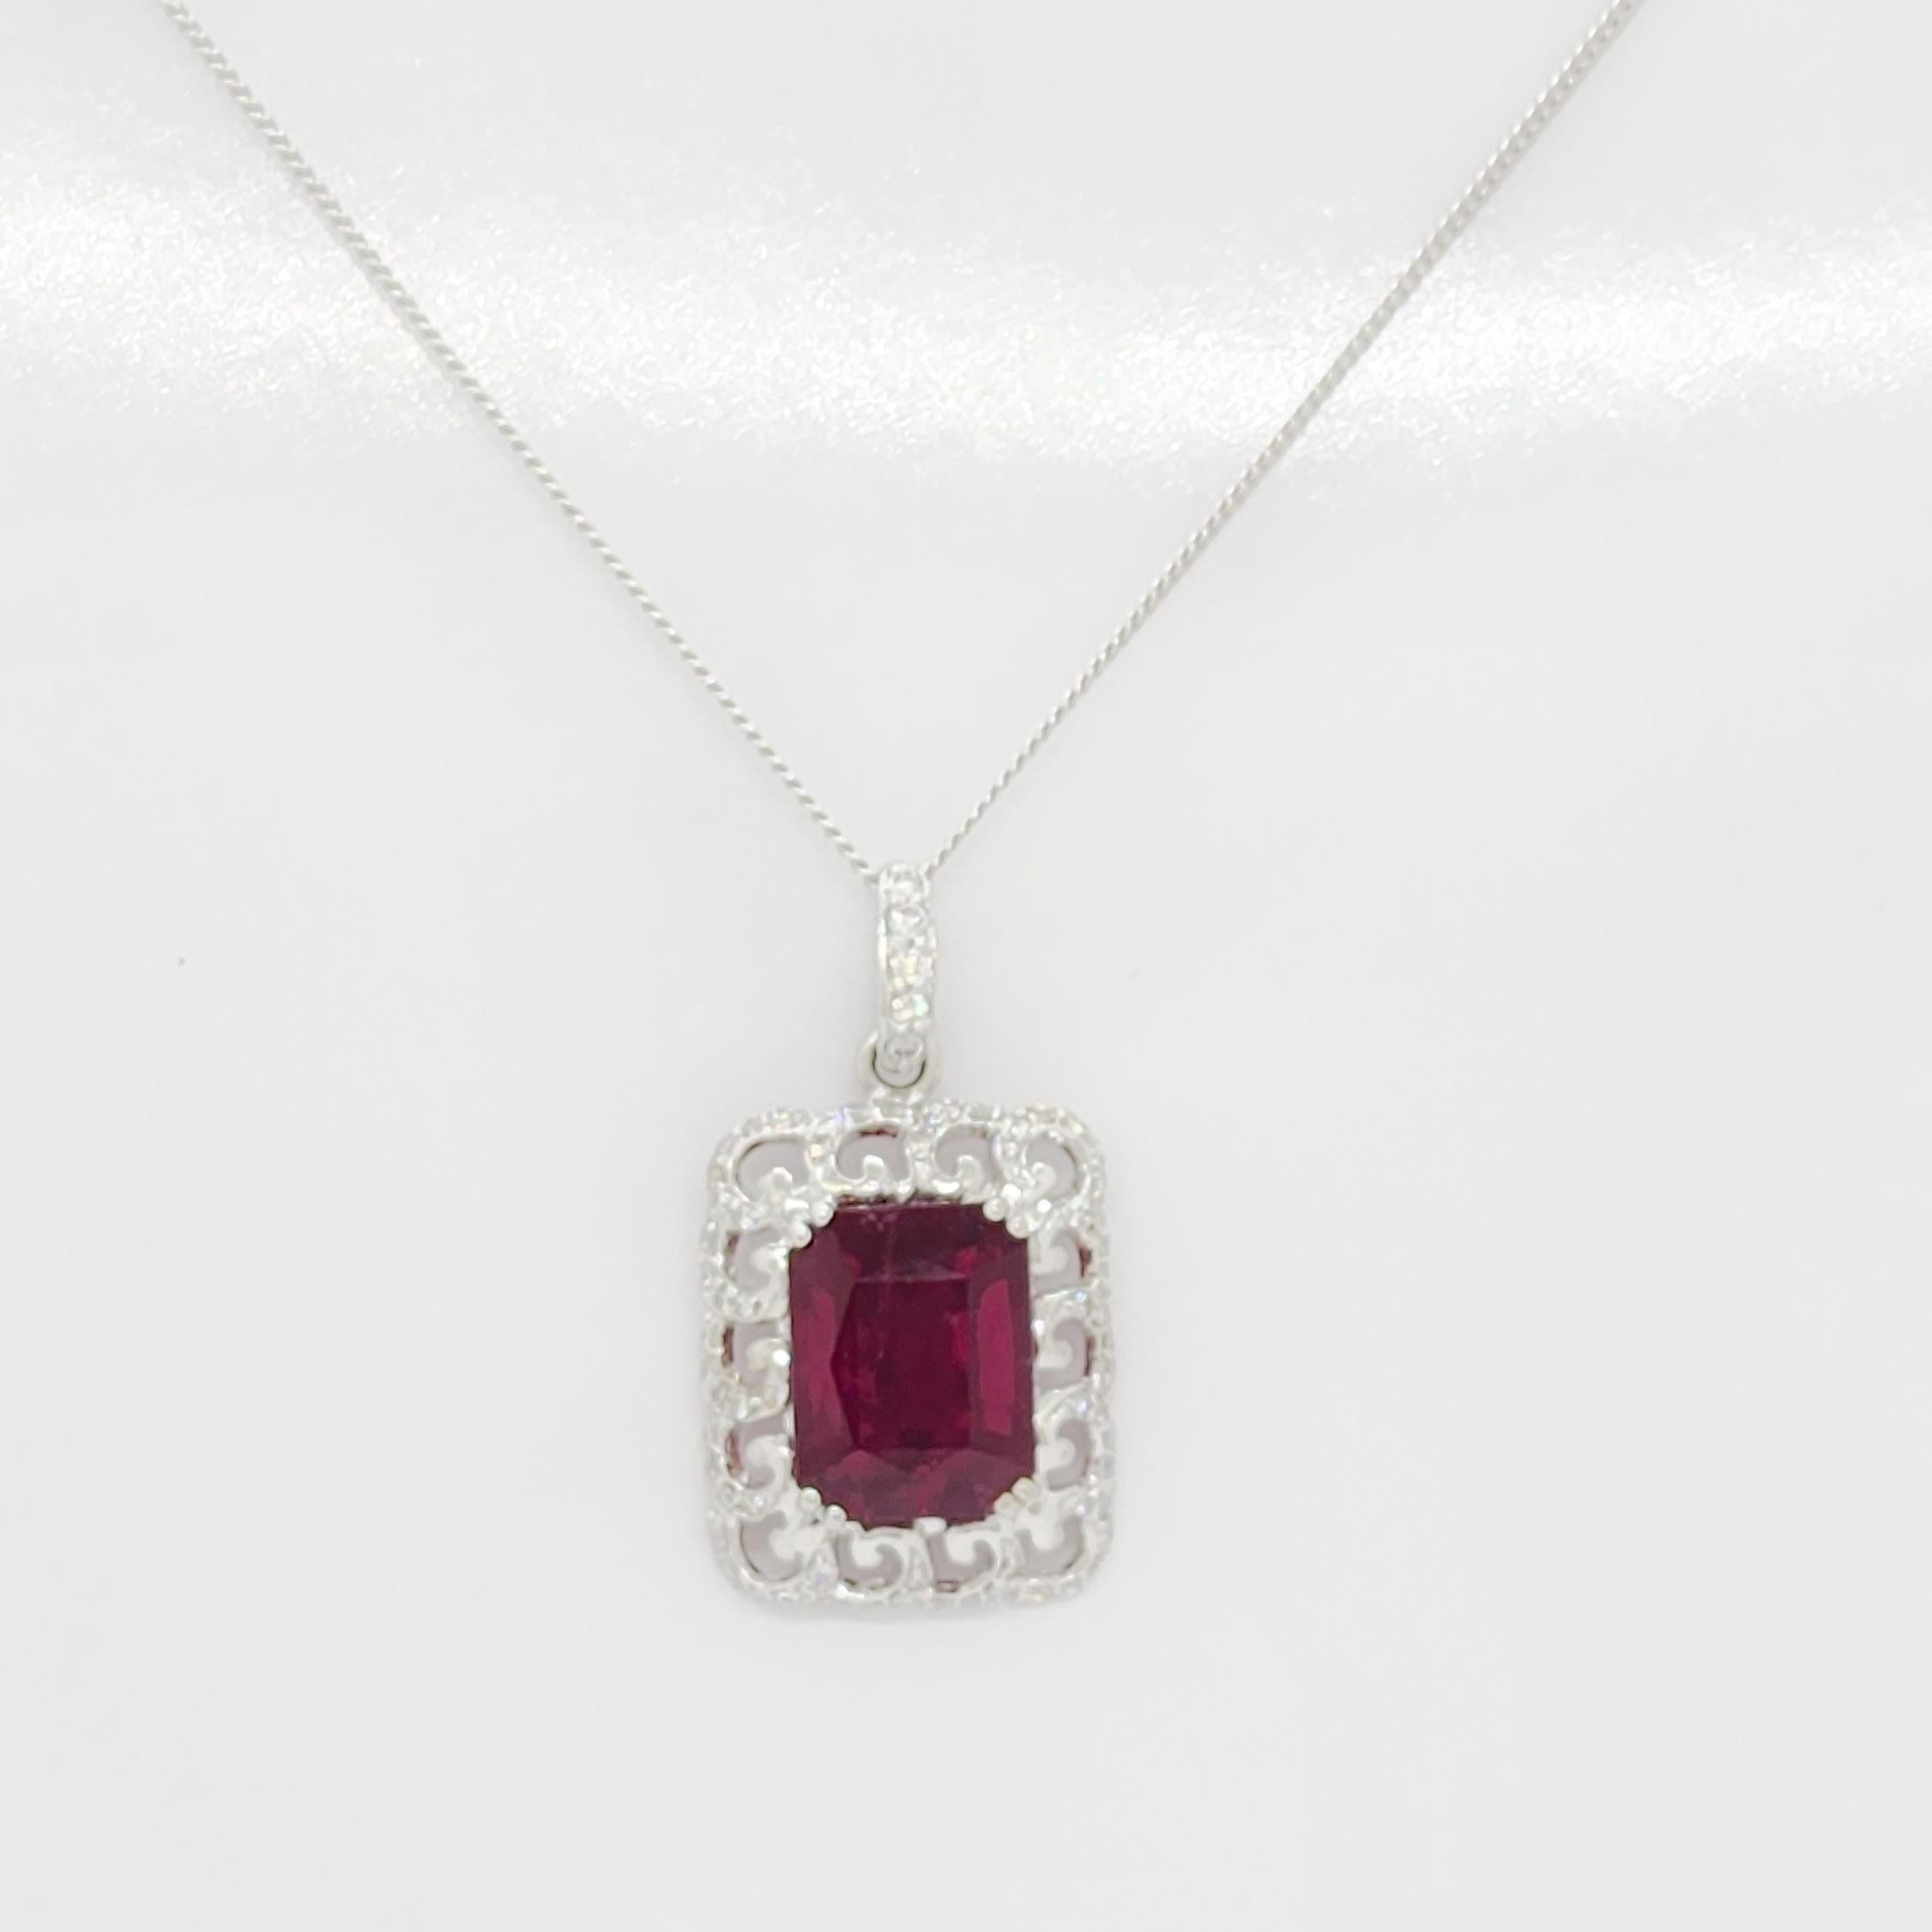 Beautiful 9.83 ct. rubellite emerald cut with 0.85 ct. good quality white diamond rounds.  Handmade in 18k white gold.  Length is 18